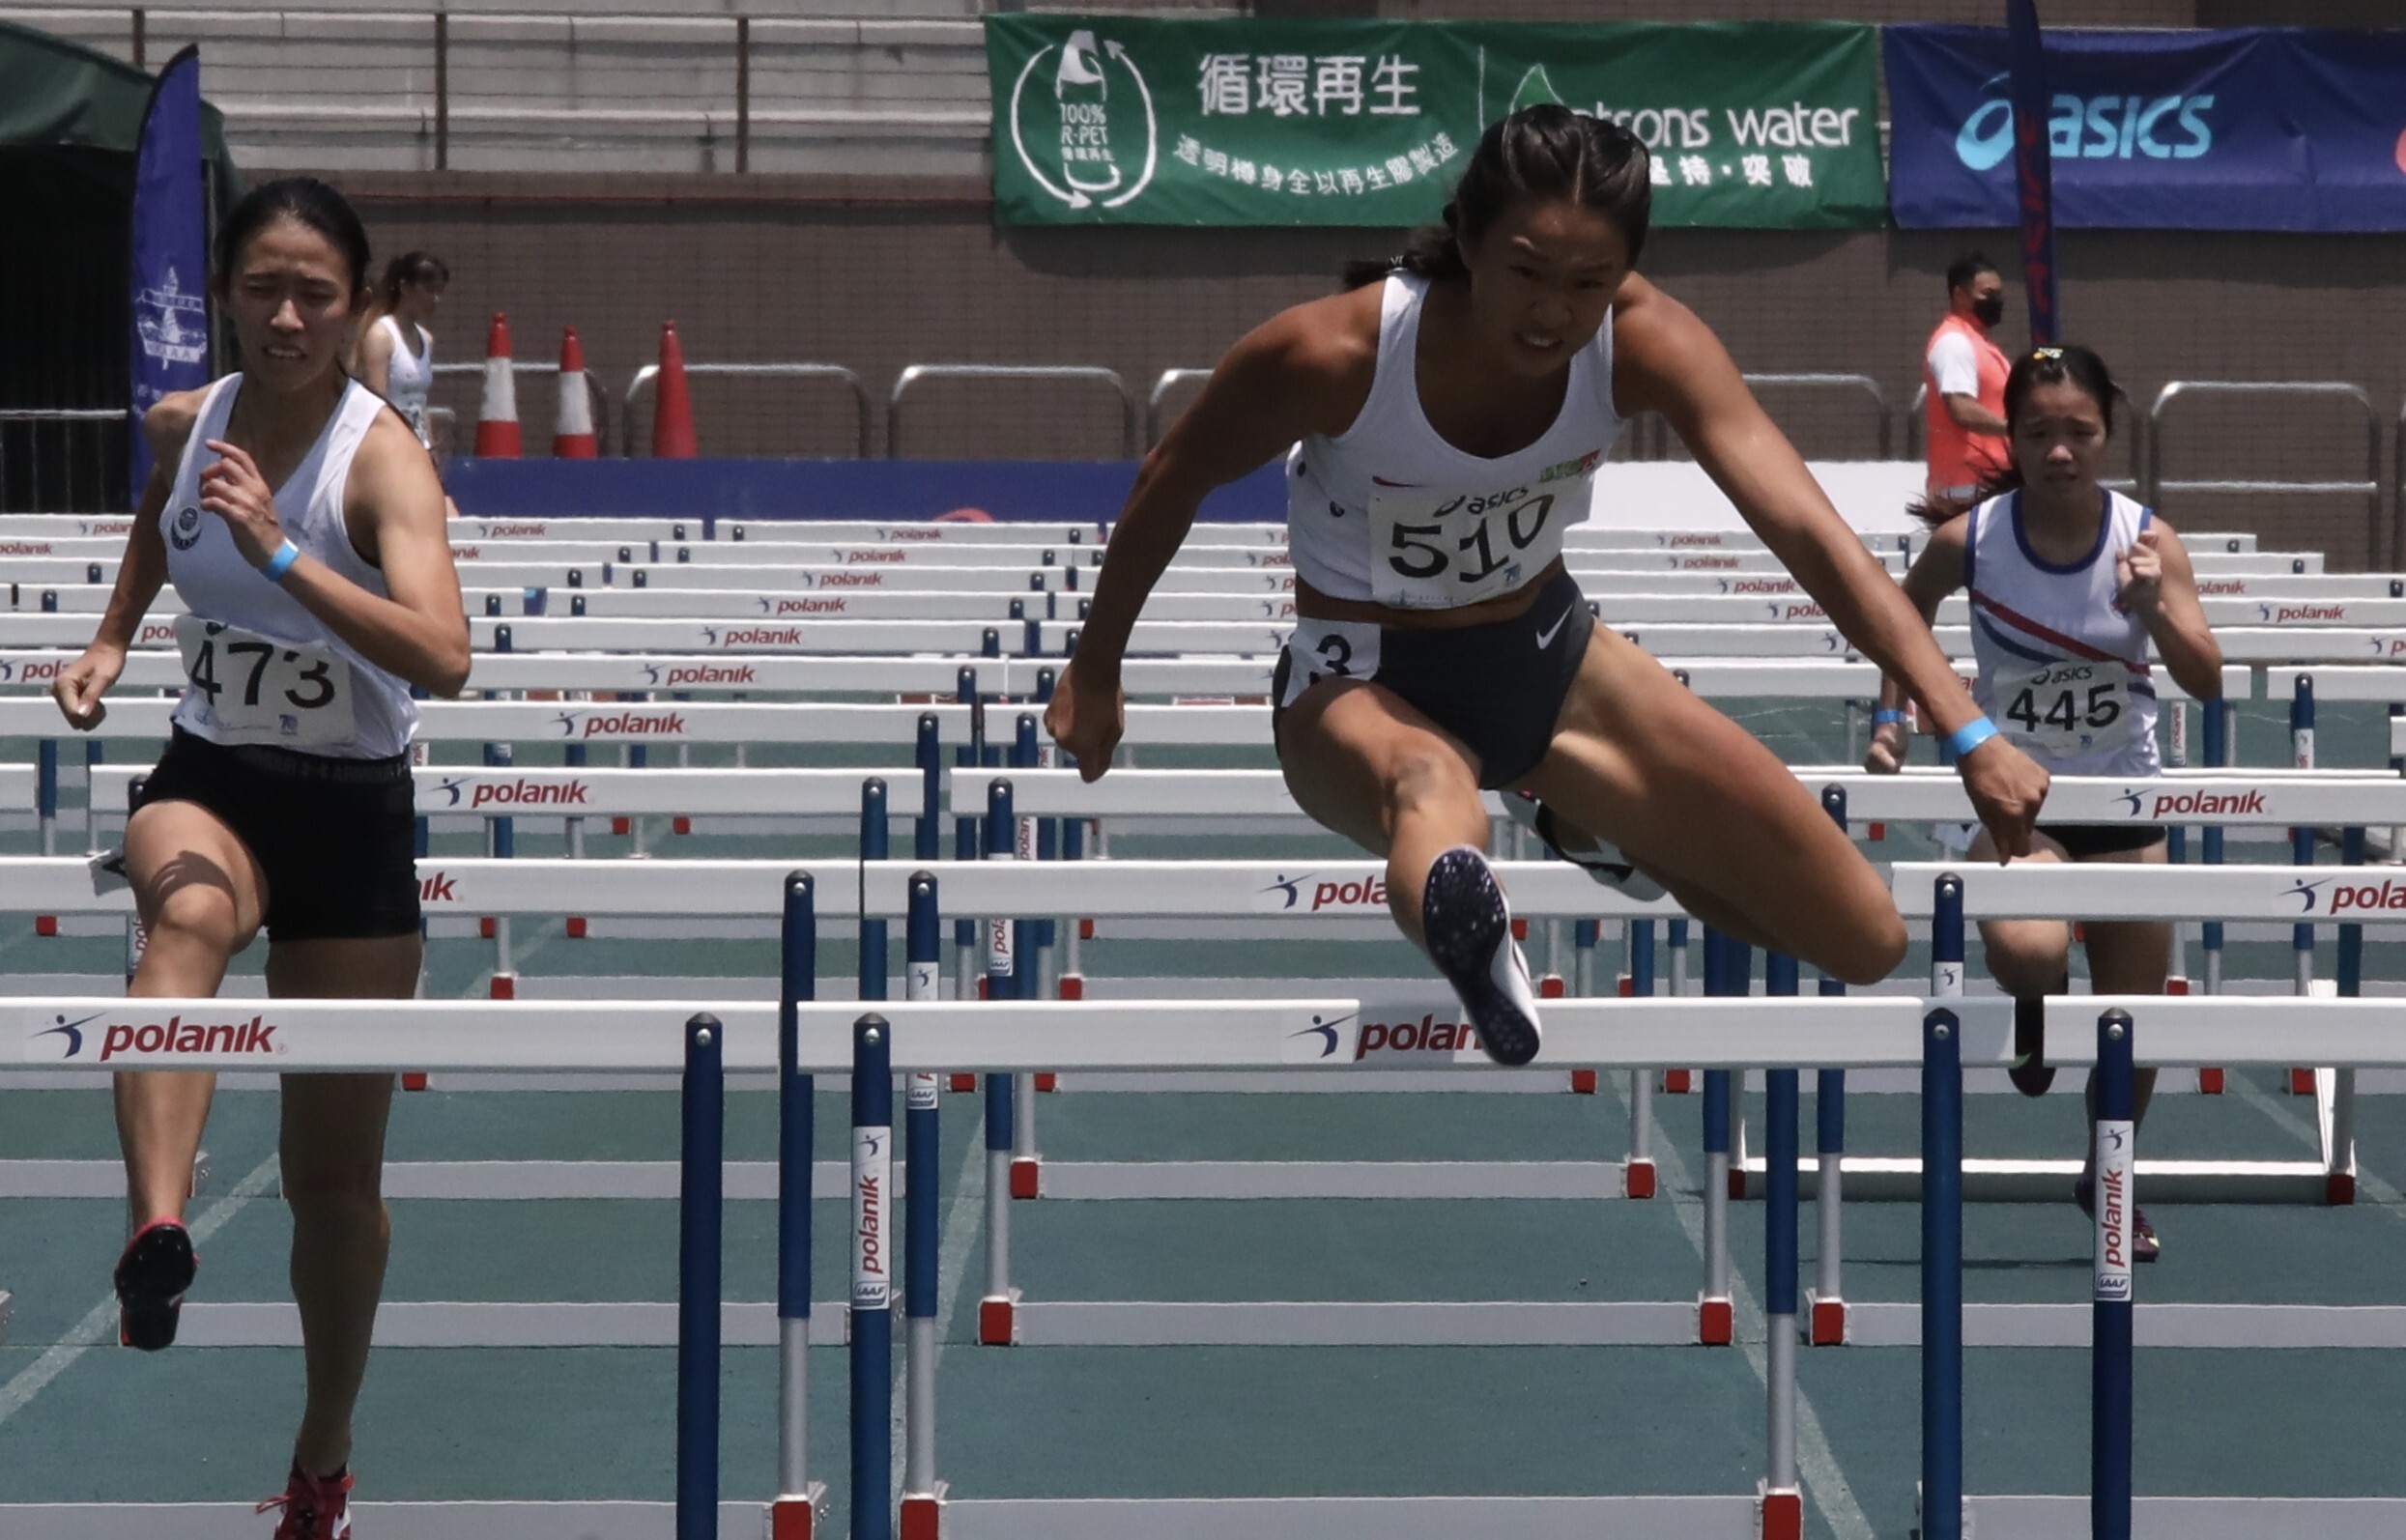 Vera Lui wins the heats in 13.49 seconds at the Hong Kong Athletics Championships in Tseung Kwan O Sports Ground, her seasonal best and fifth best time. Photo: Jonathan Wong